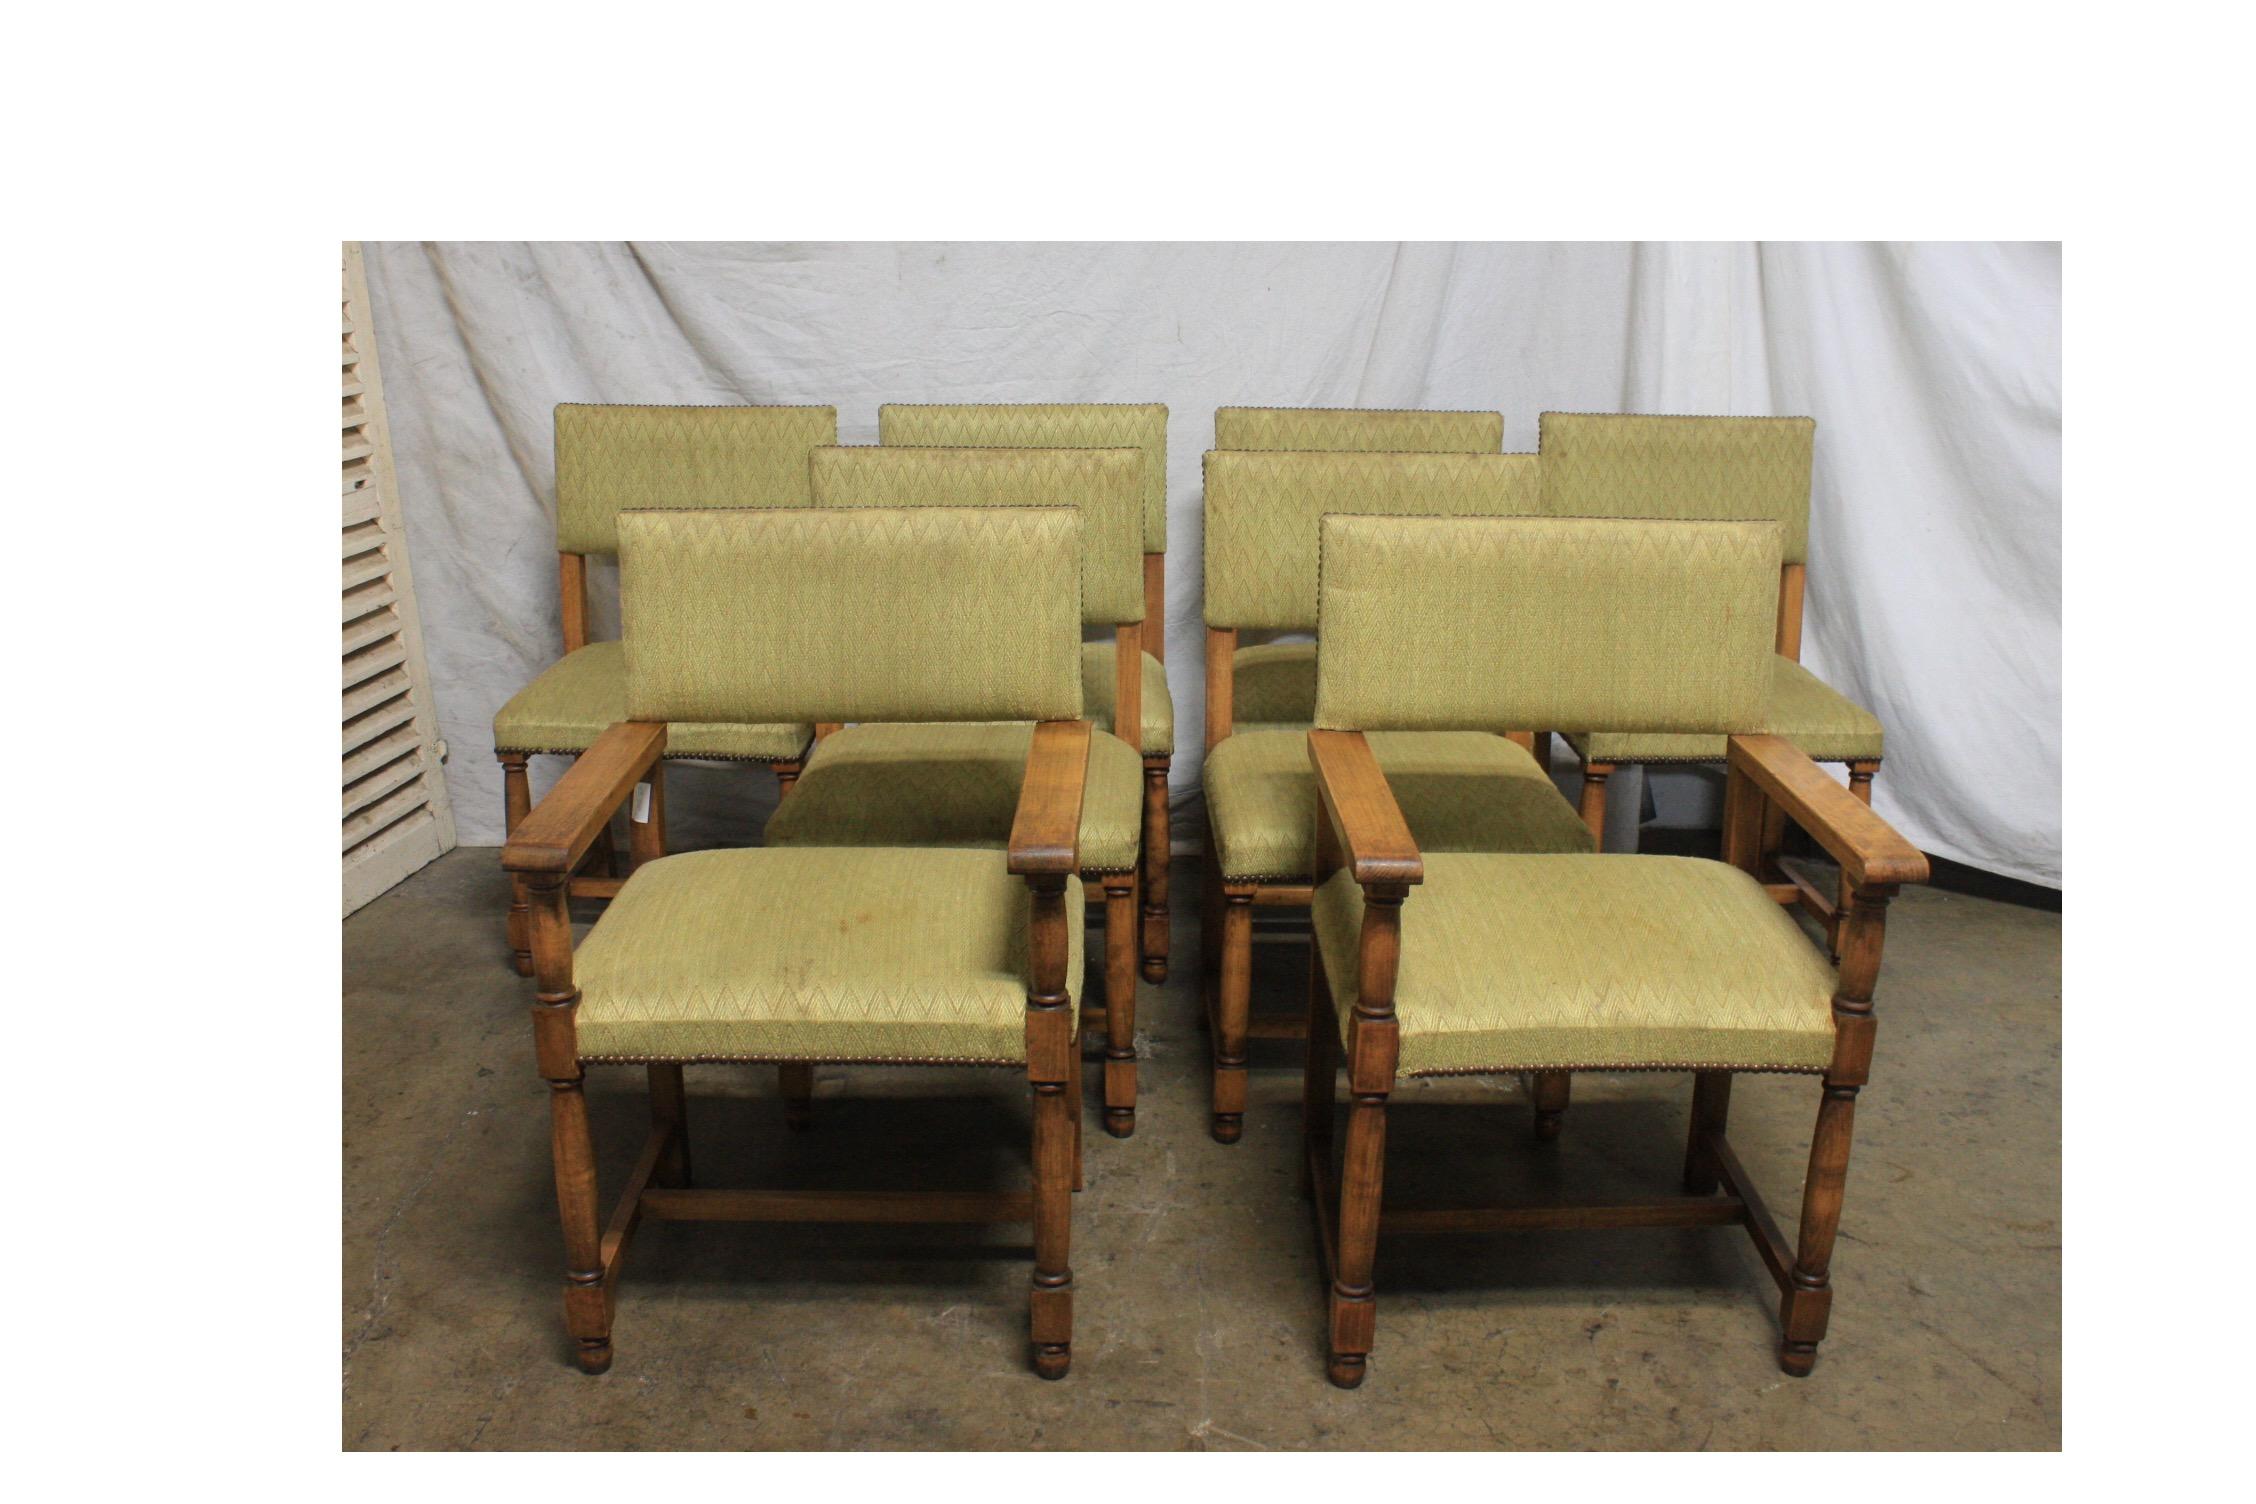 French early 20th century set of dining chairs and armchairs.

Dimensions of the pair of armchairs 23.25in. W x 18.5in. D x 35.25in. H (Seat 18in. H).